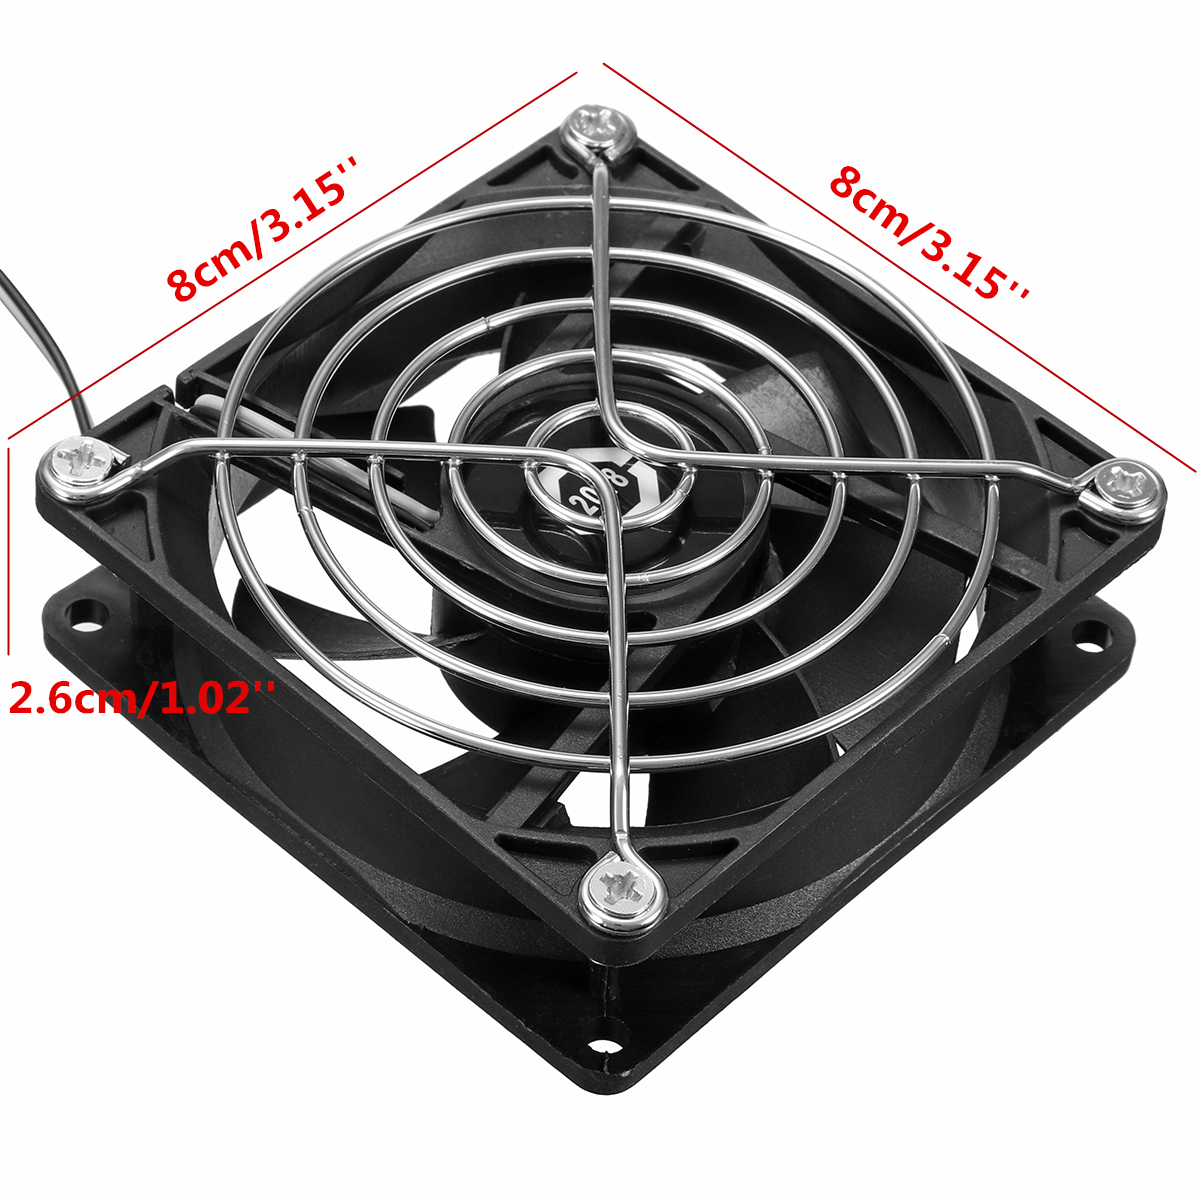 8cm USB Cooling Fan Heatsink for PC Computer TV Box for Xbox for PlayStation Electronics 9